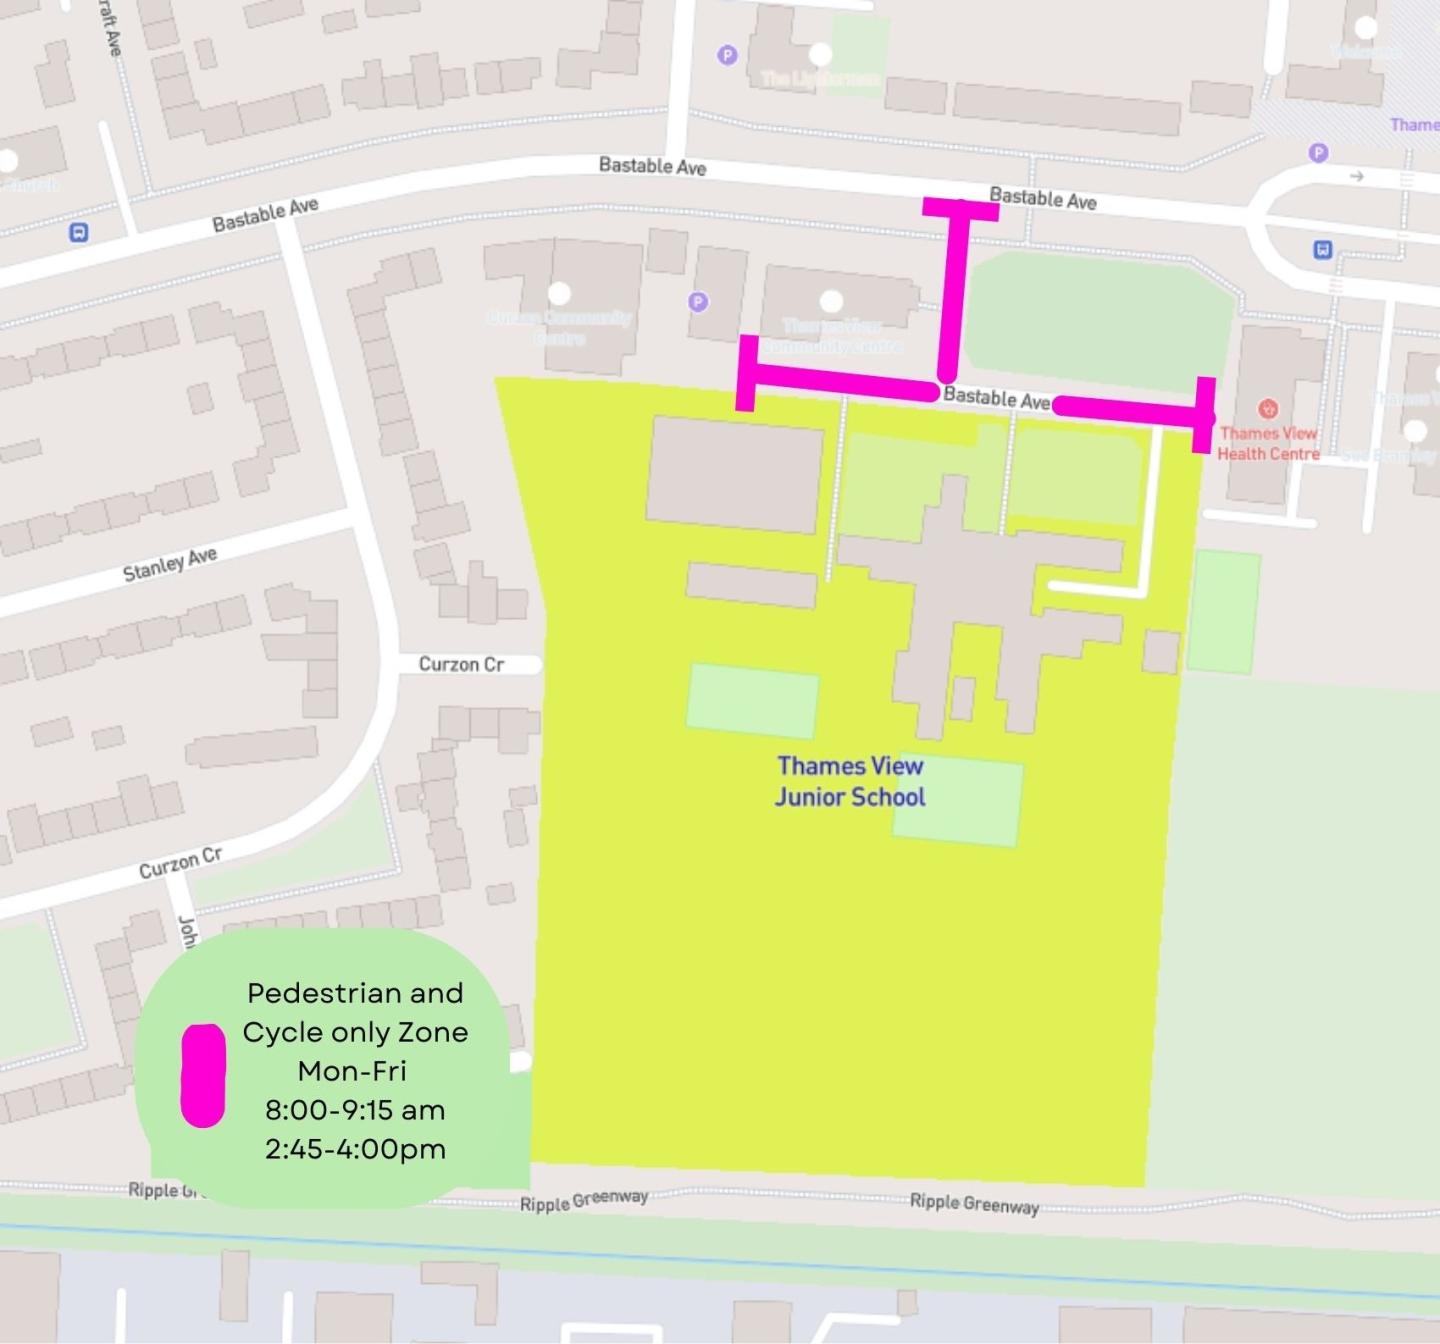 A map showing the location of the School Street for Thames View Junior School